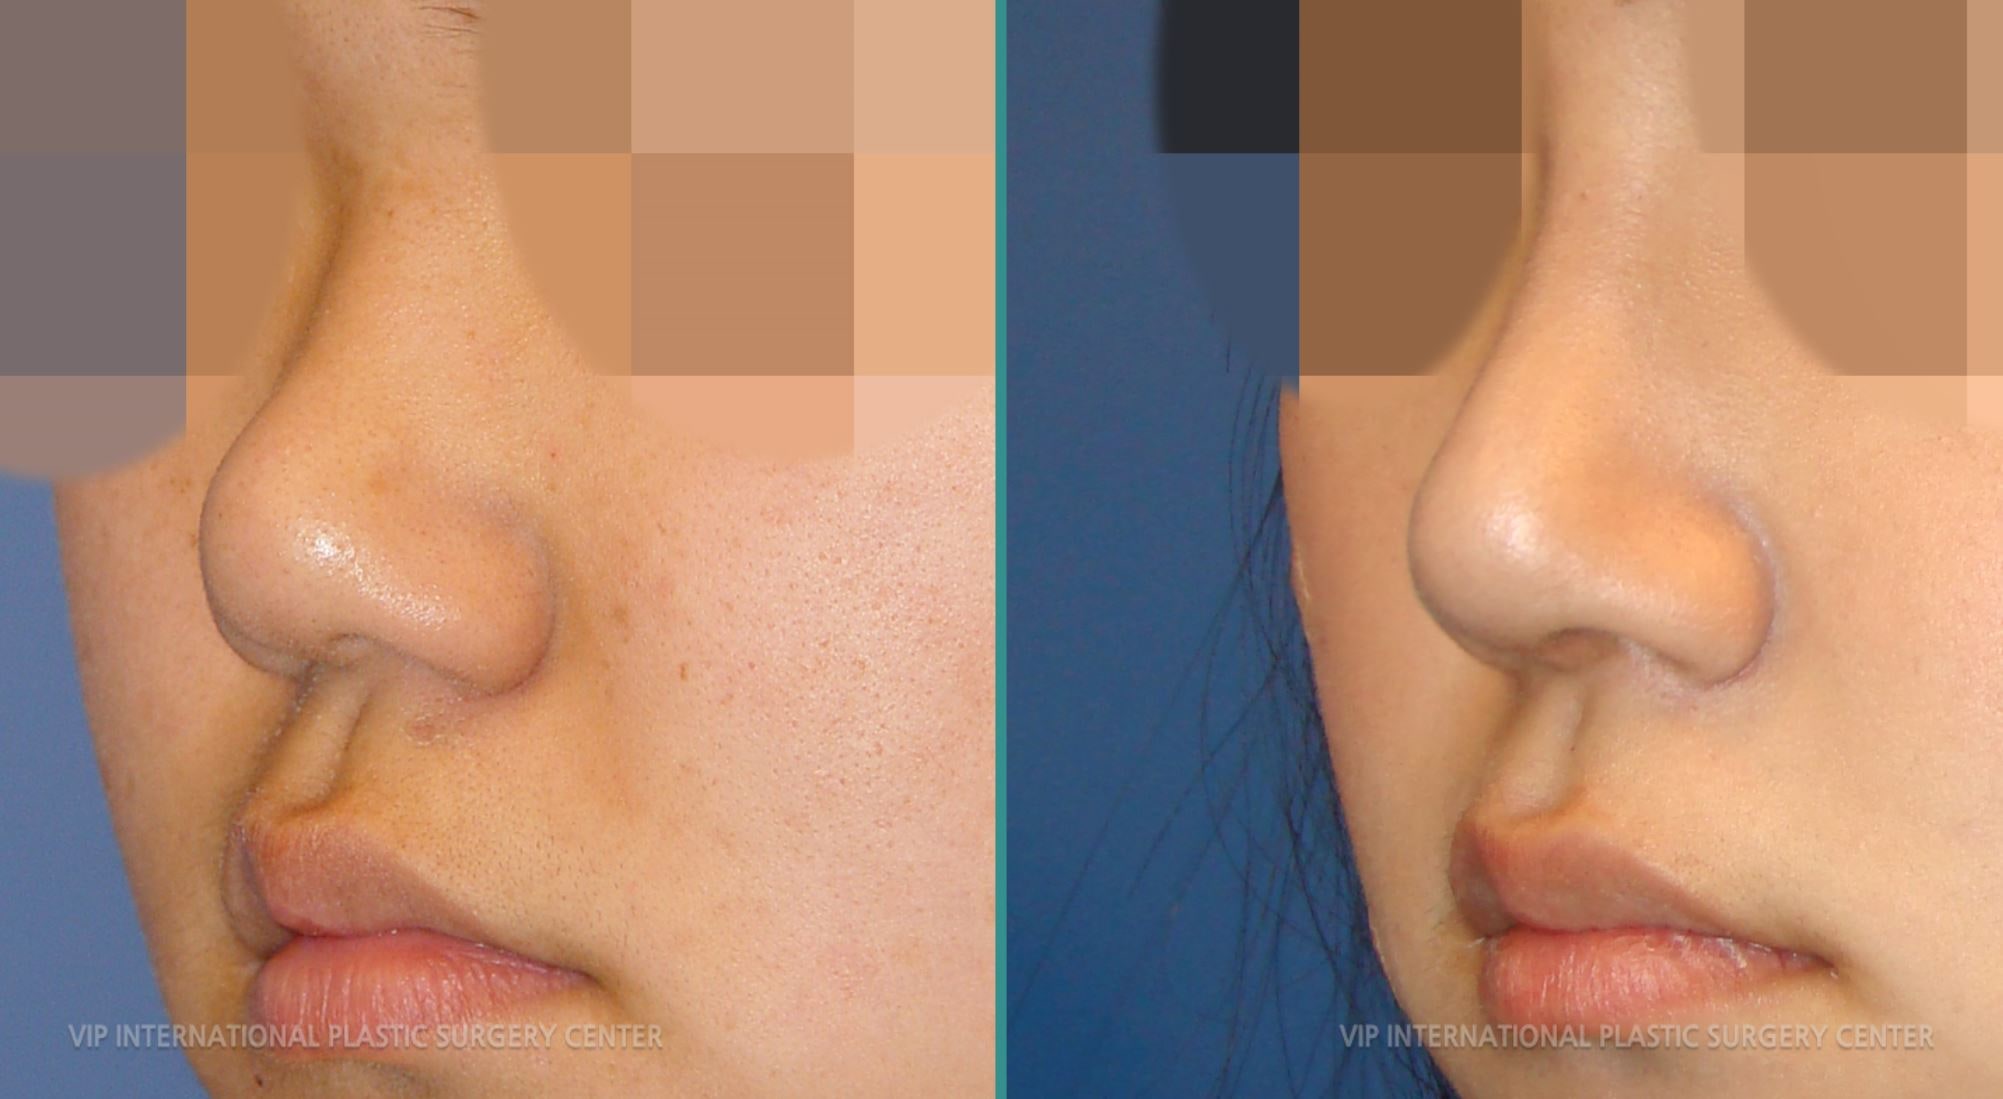 Revision Rhinoplasty Before and After(Stubby Nose)